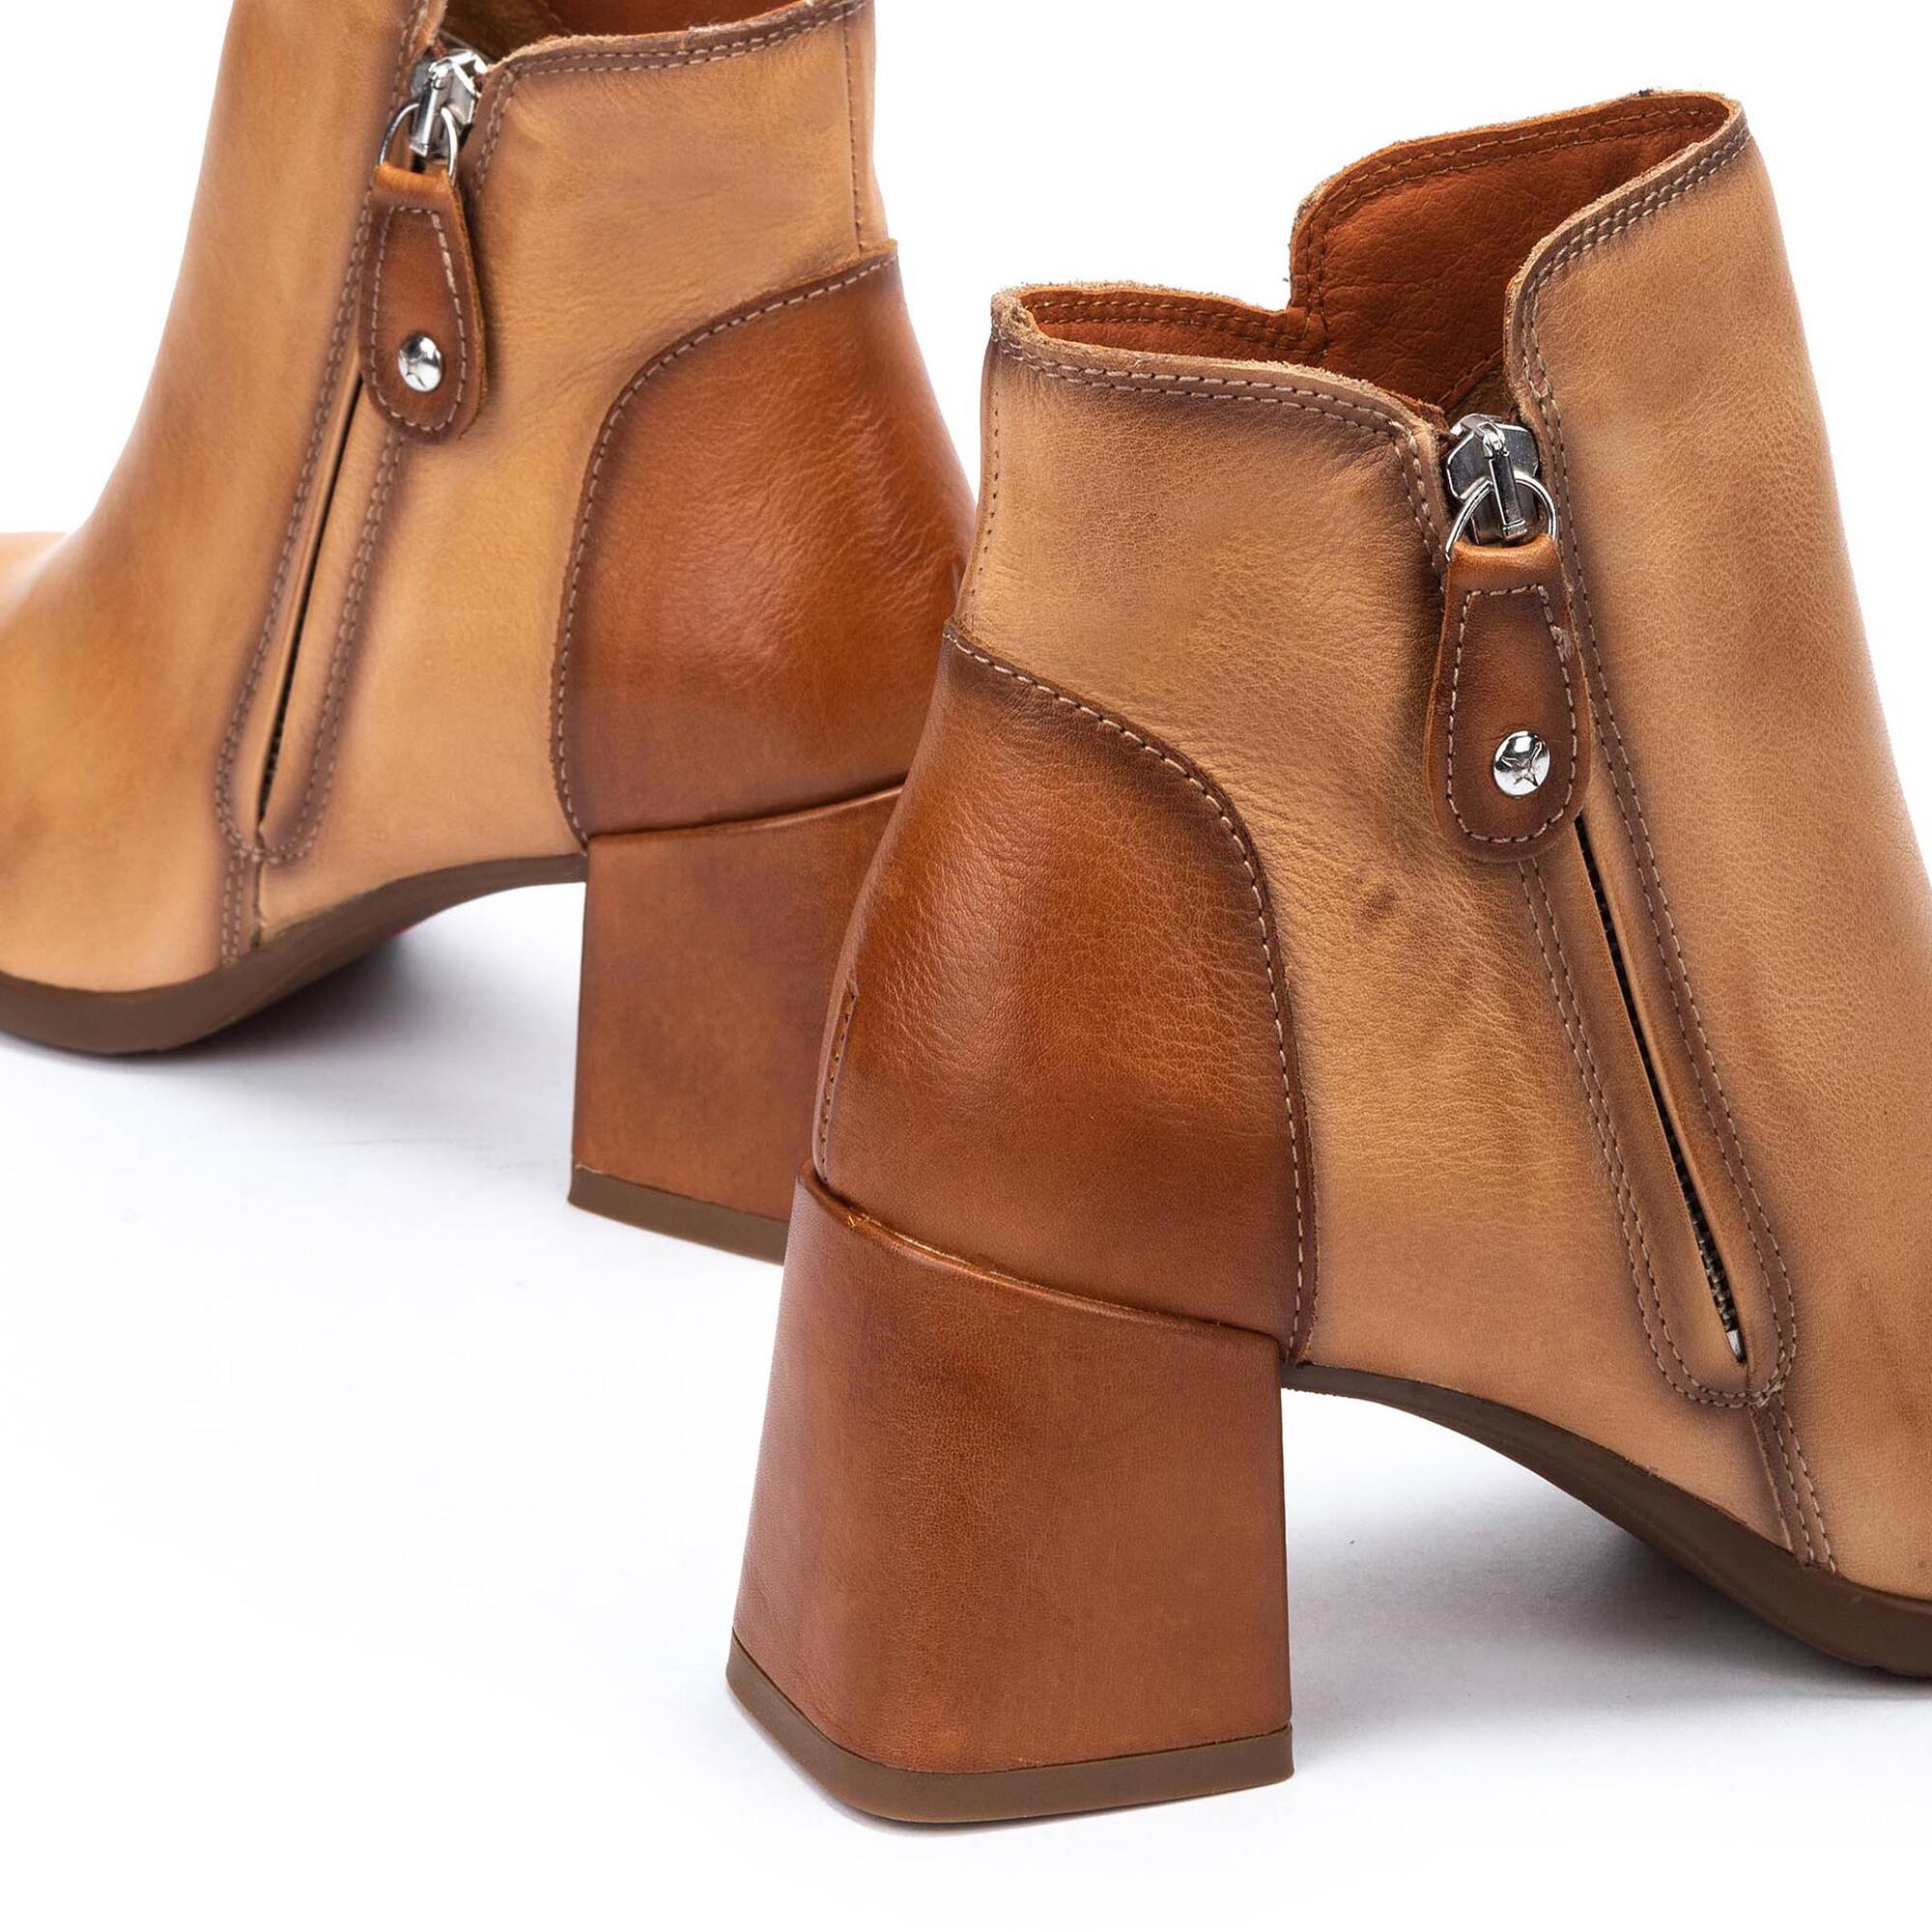 Ankle boots | SEVILLA W1W-8816C1, ALMOND, large image number 60 | null